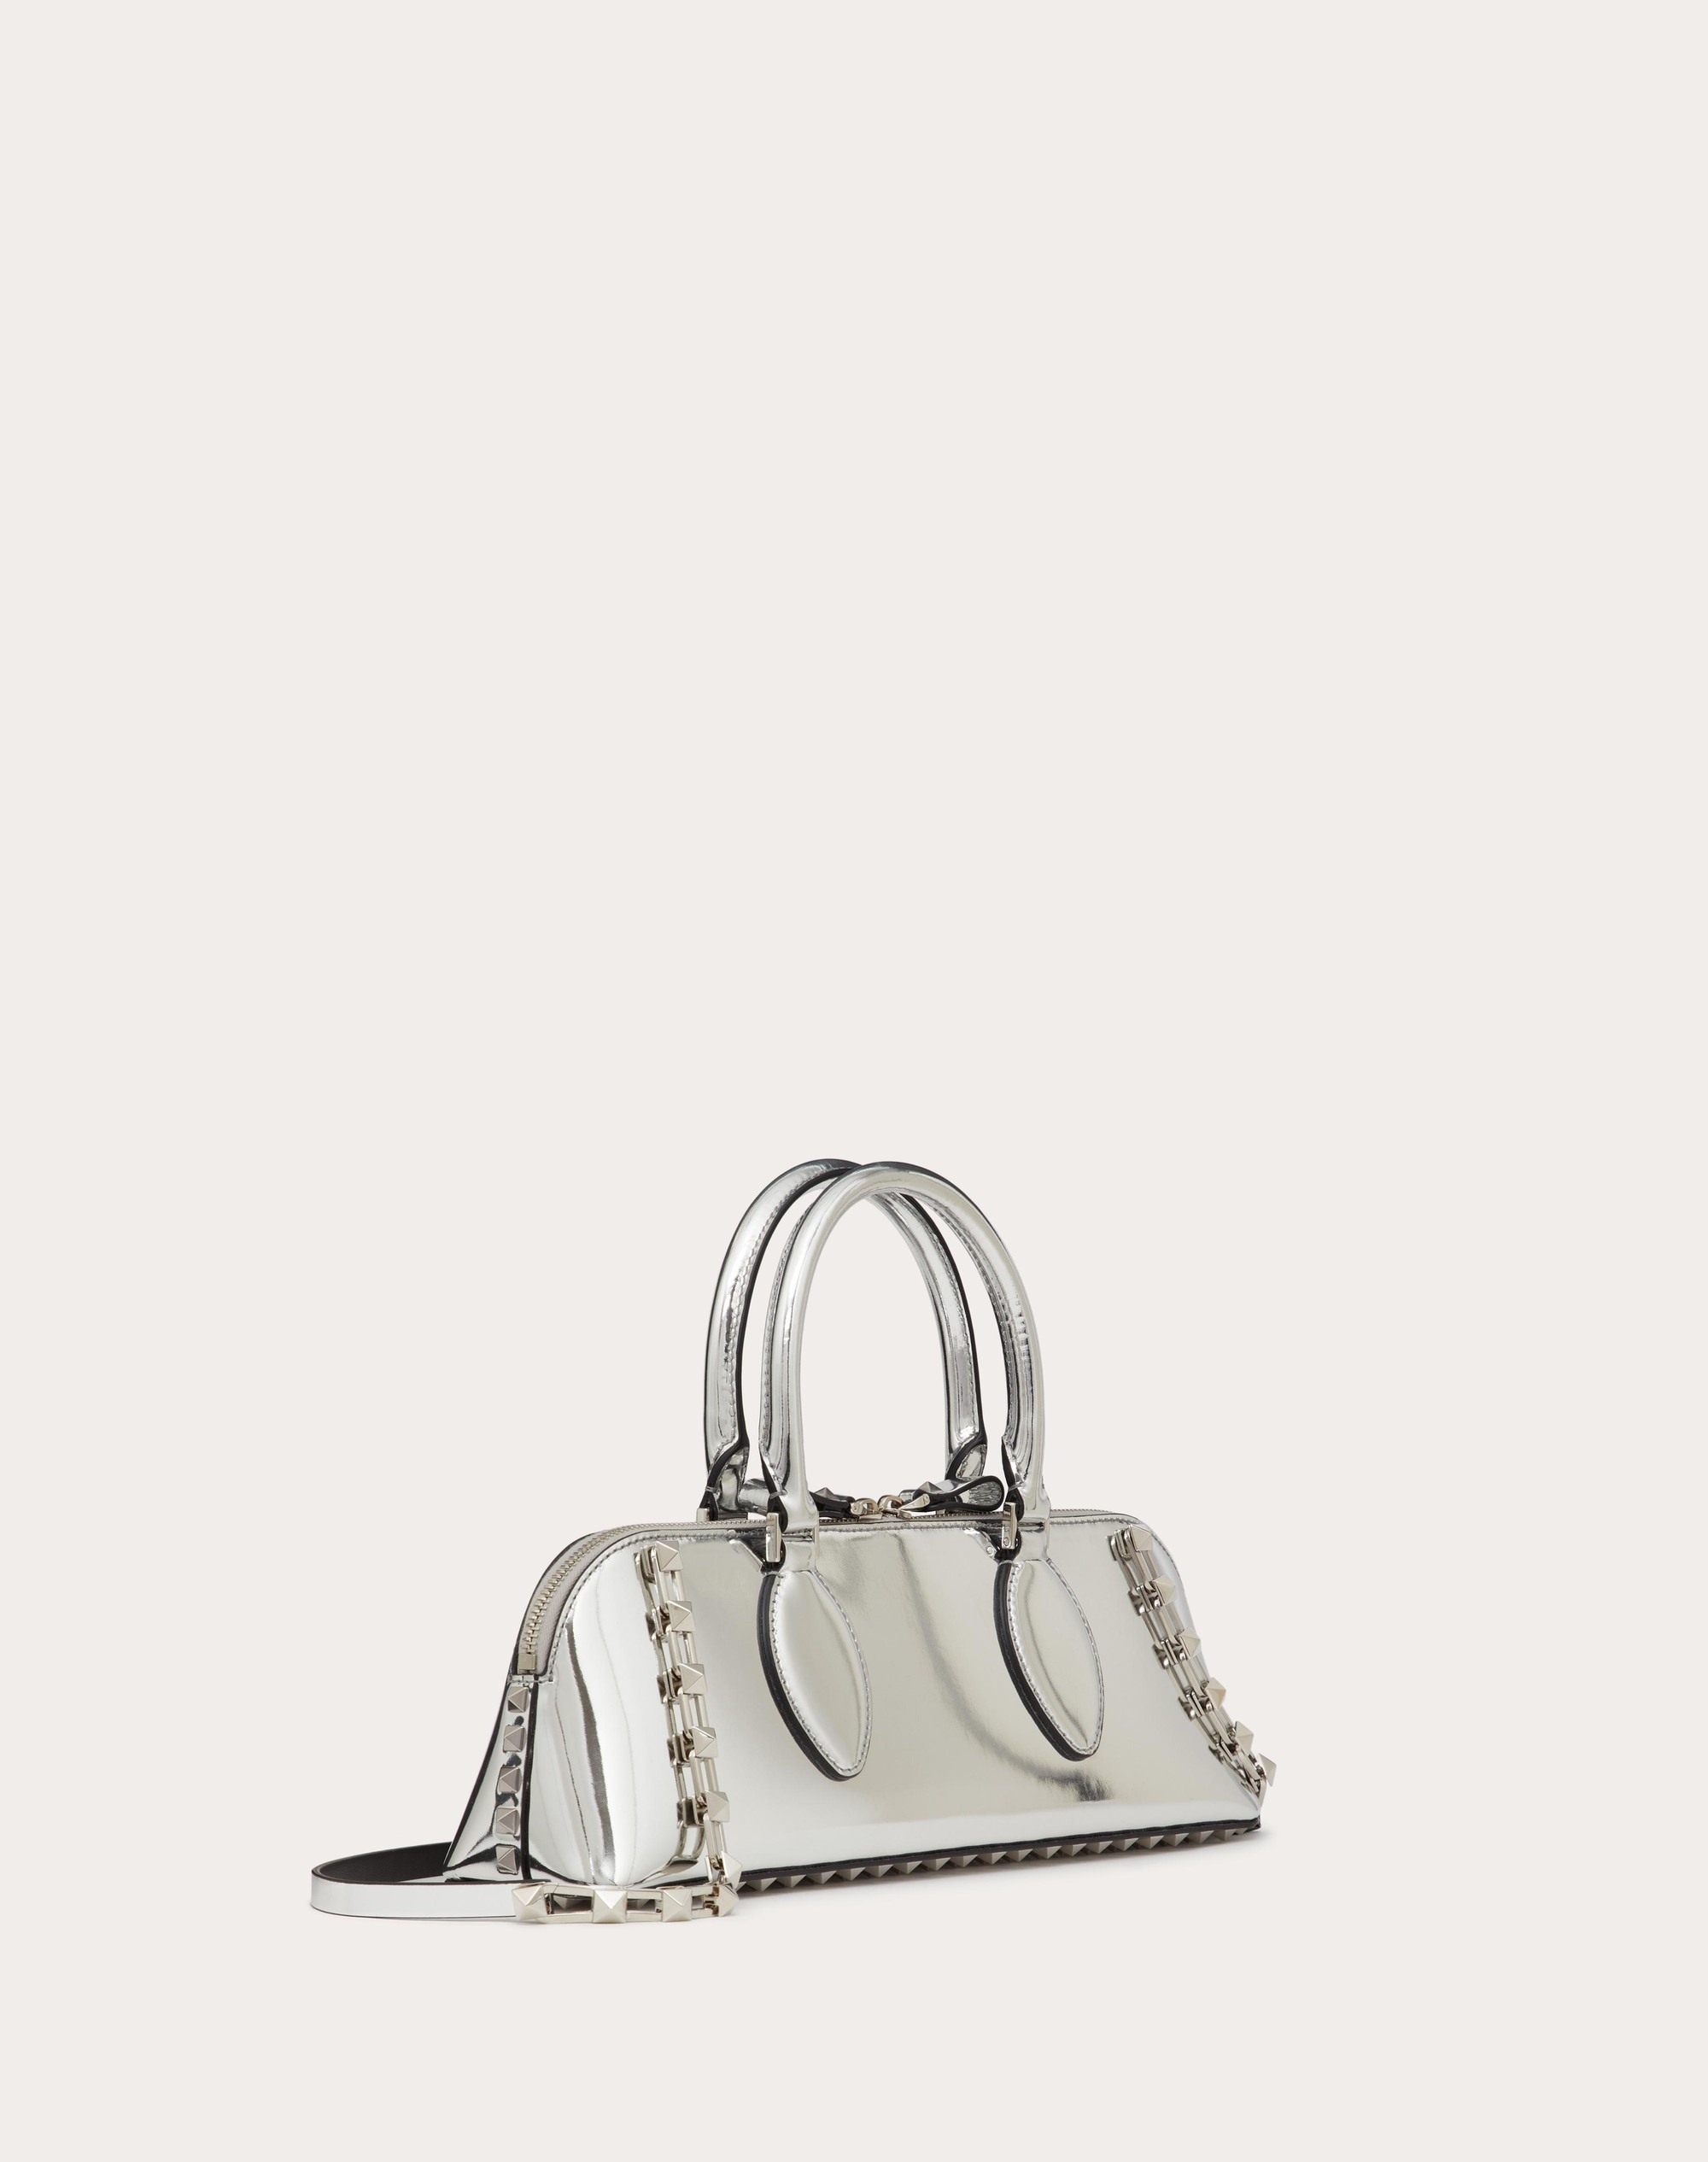 Rockstud Small mirrored leather tote bag